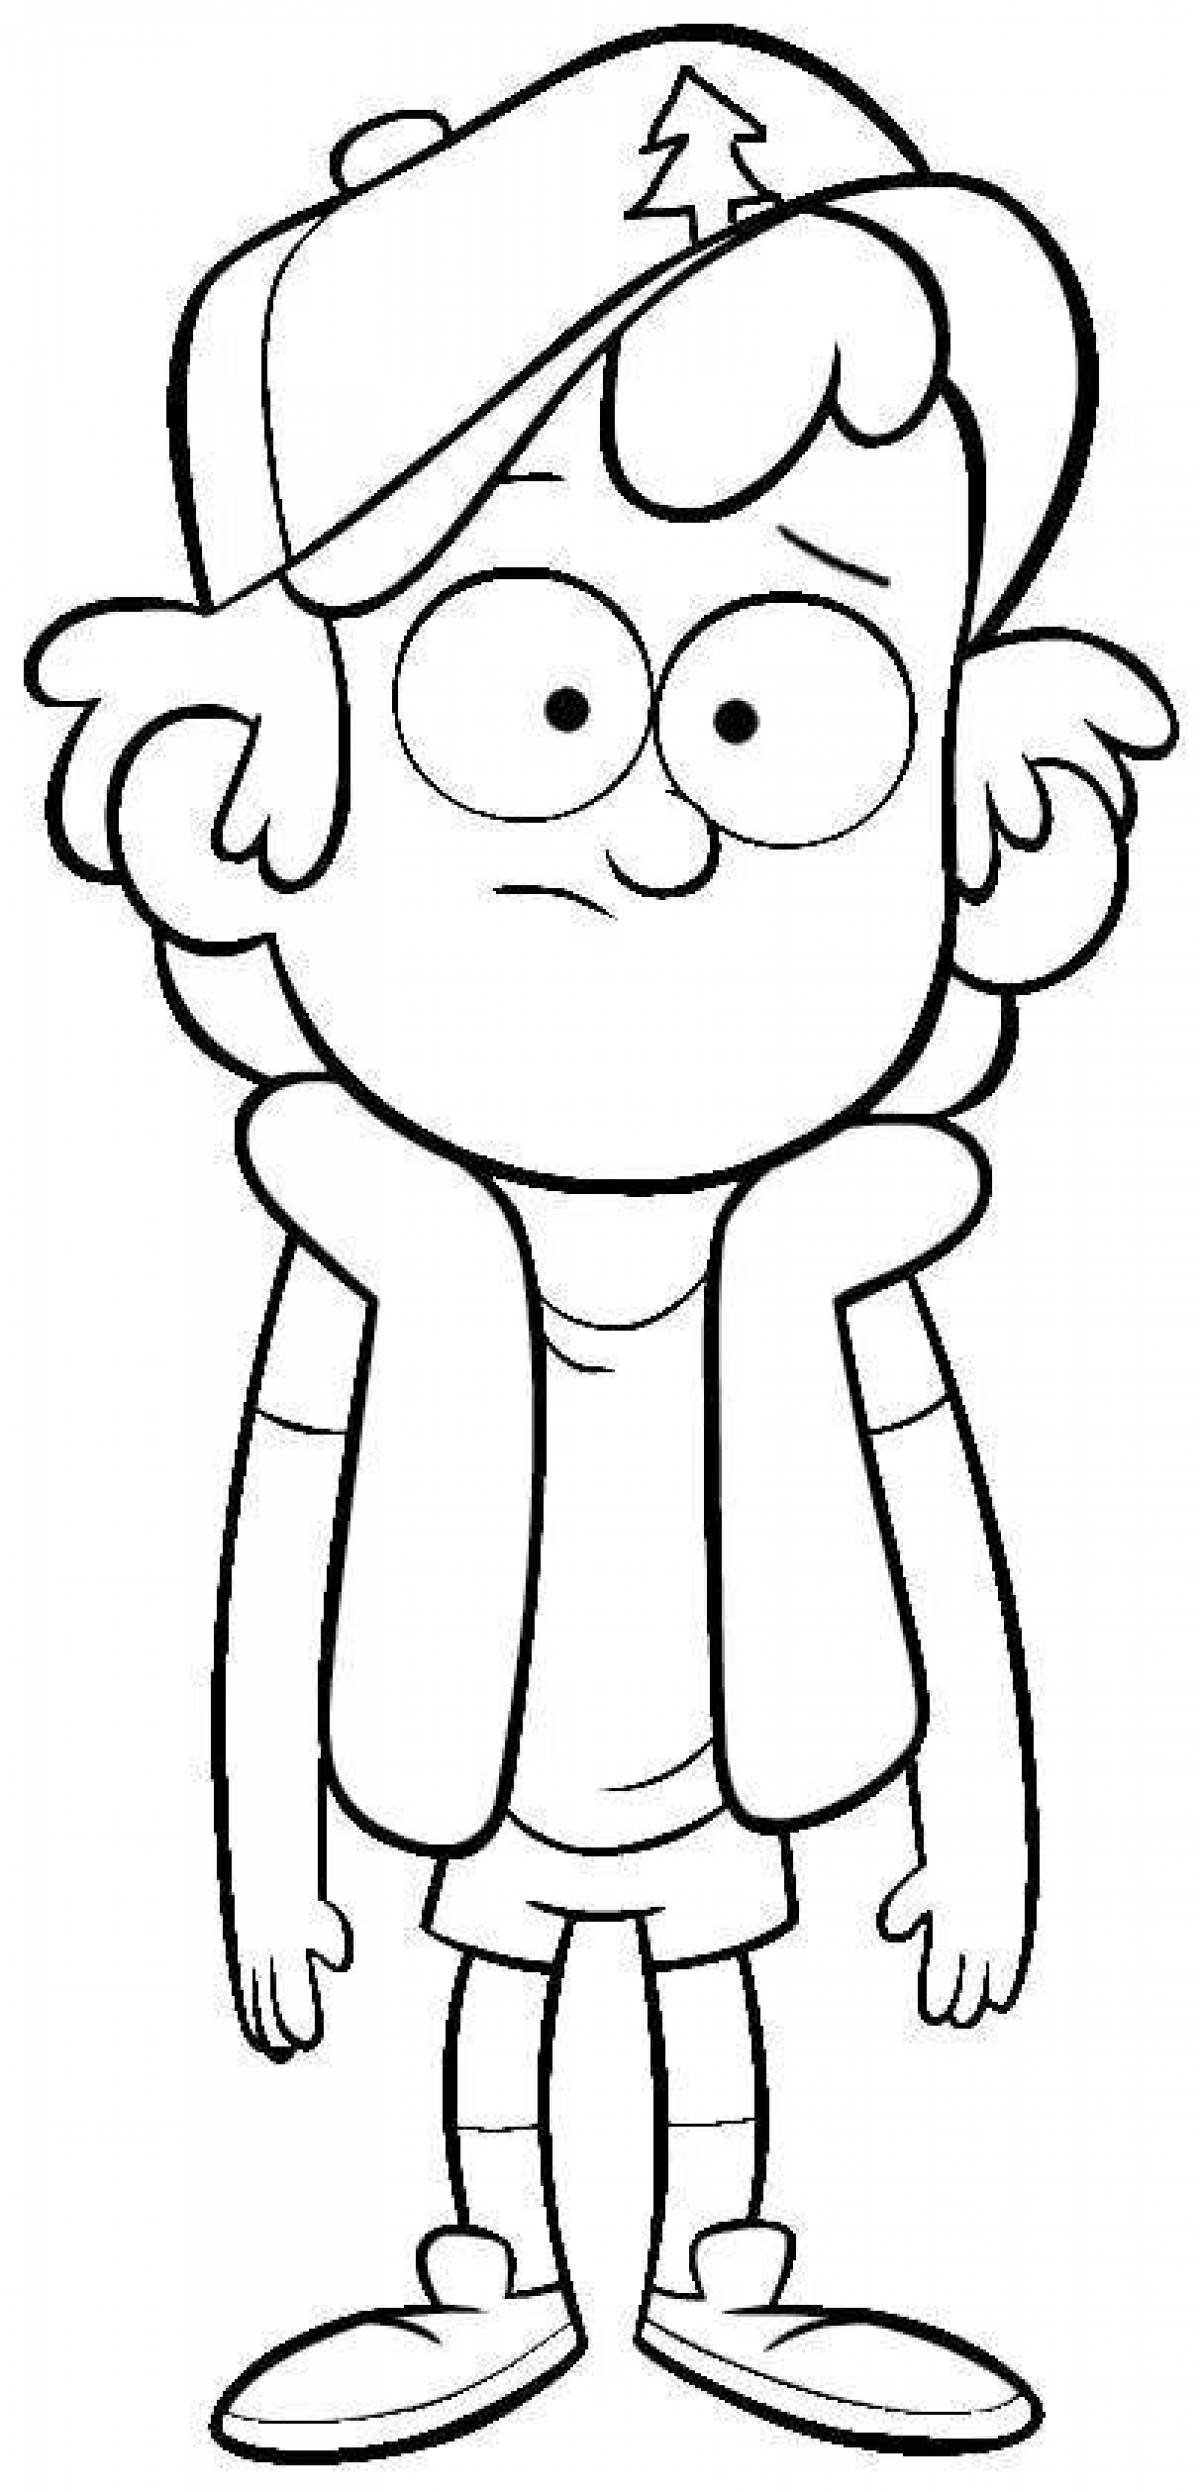 Dipper bright coloring page